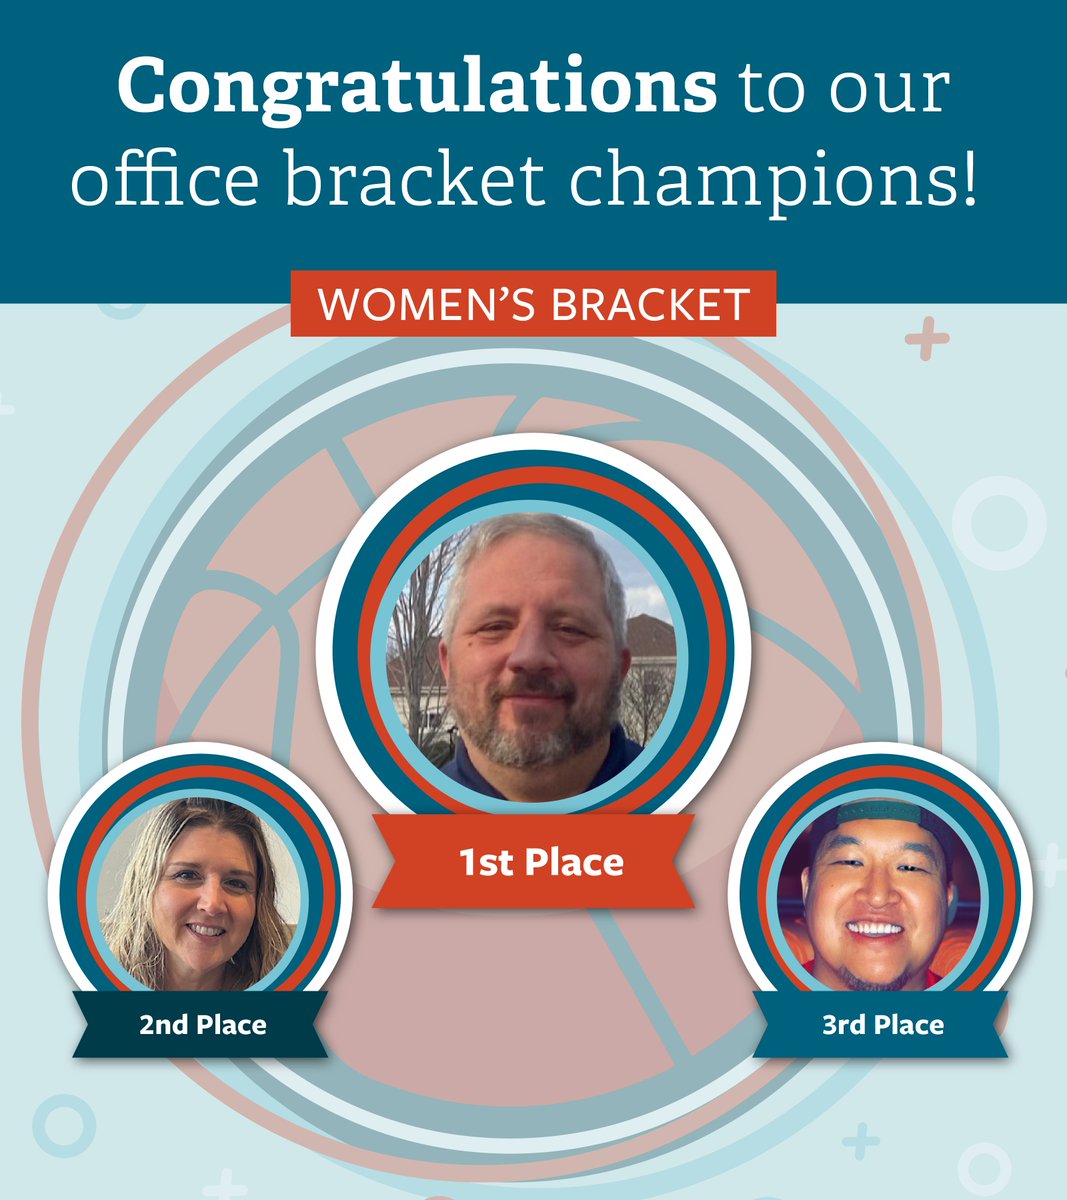 Announcing our office bracket champions! A huge thank you to all who participated and made our #MarchMadness competition so exciting. 🏀🏆 

#AscendiumEd #AscendiumLife #NCAABasketball #BracketChallenge #OfficeCompetition